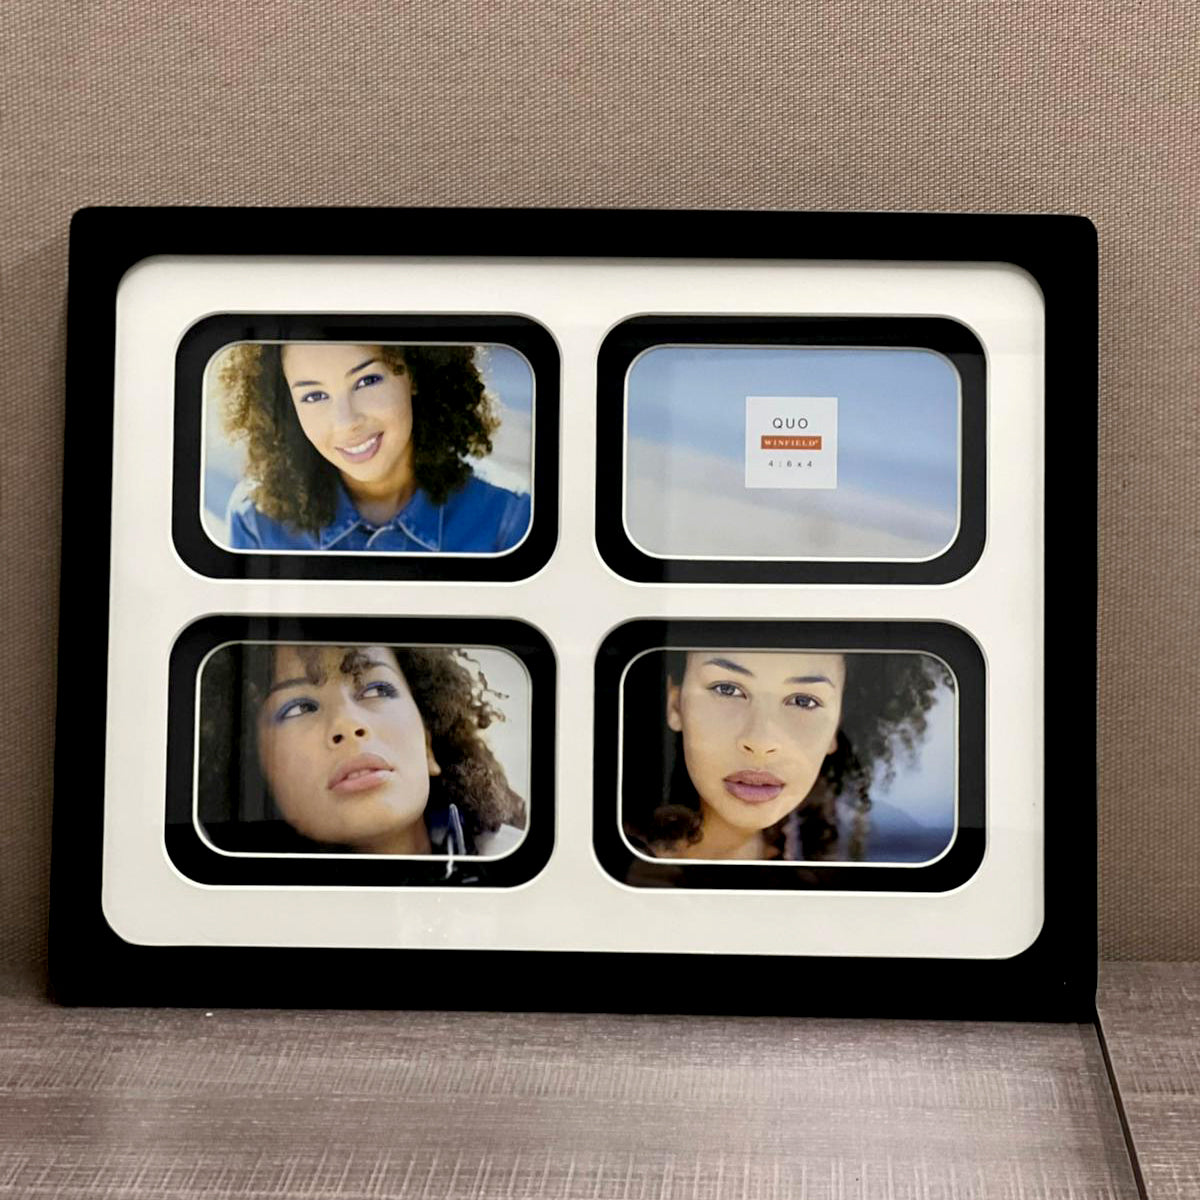 Winfield QUO Photo Frame Black and white - 4 photos -  4x6